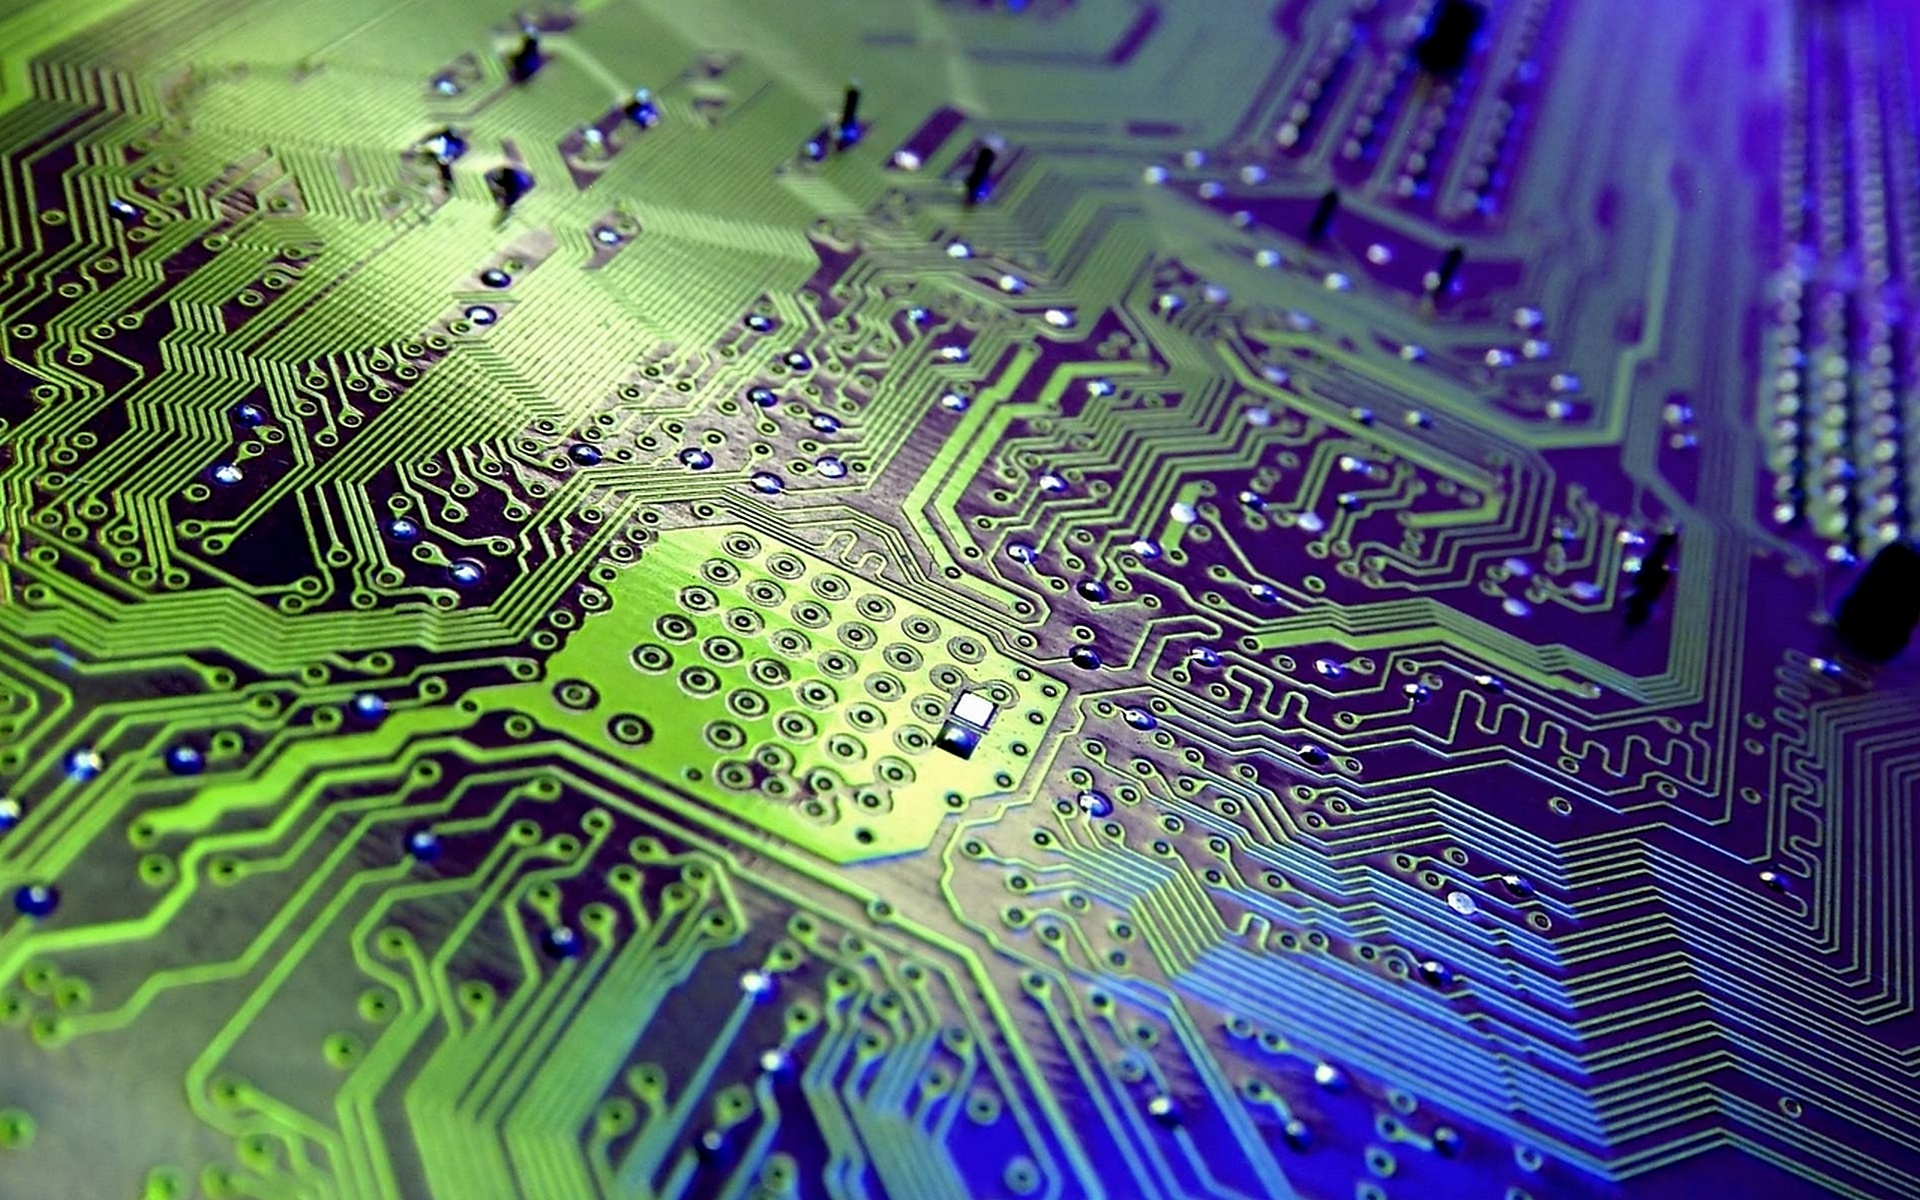 Pin By Klus G On Circuit Board Pinterest Wallpapers, - Circuit Board Up Close - HD Wallpaper 